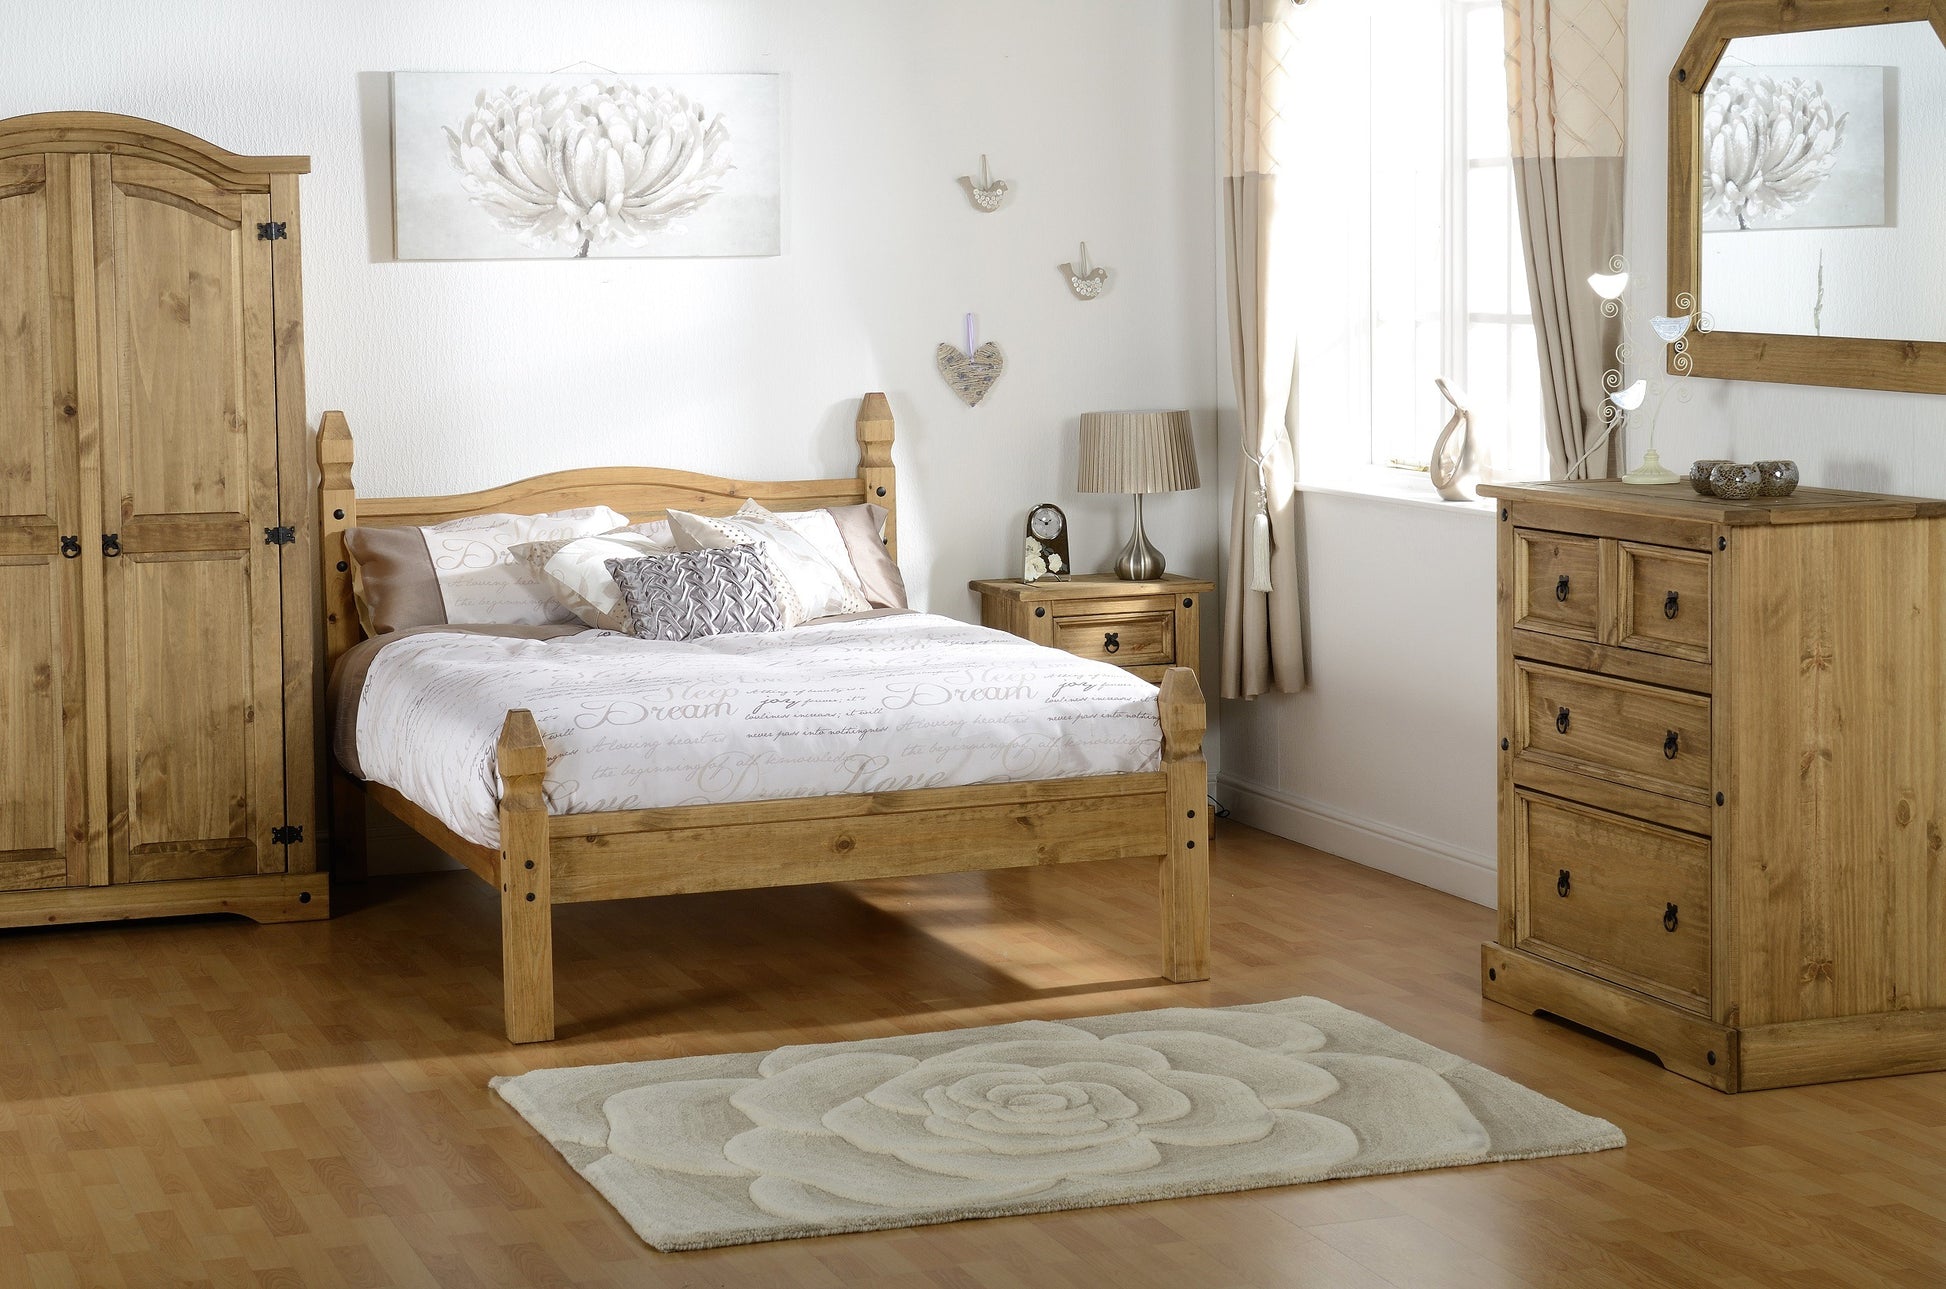 The Corona Trio Bedside Locker, Chest of Drawers, and Wardrobe Set